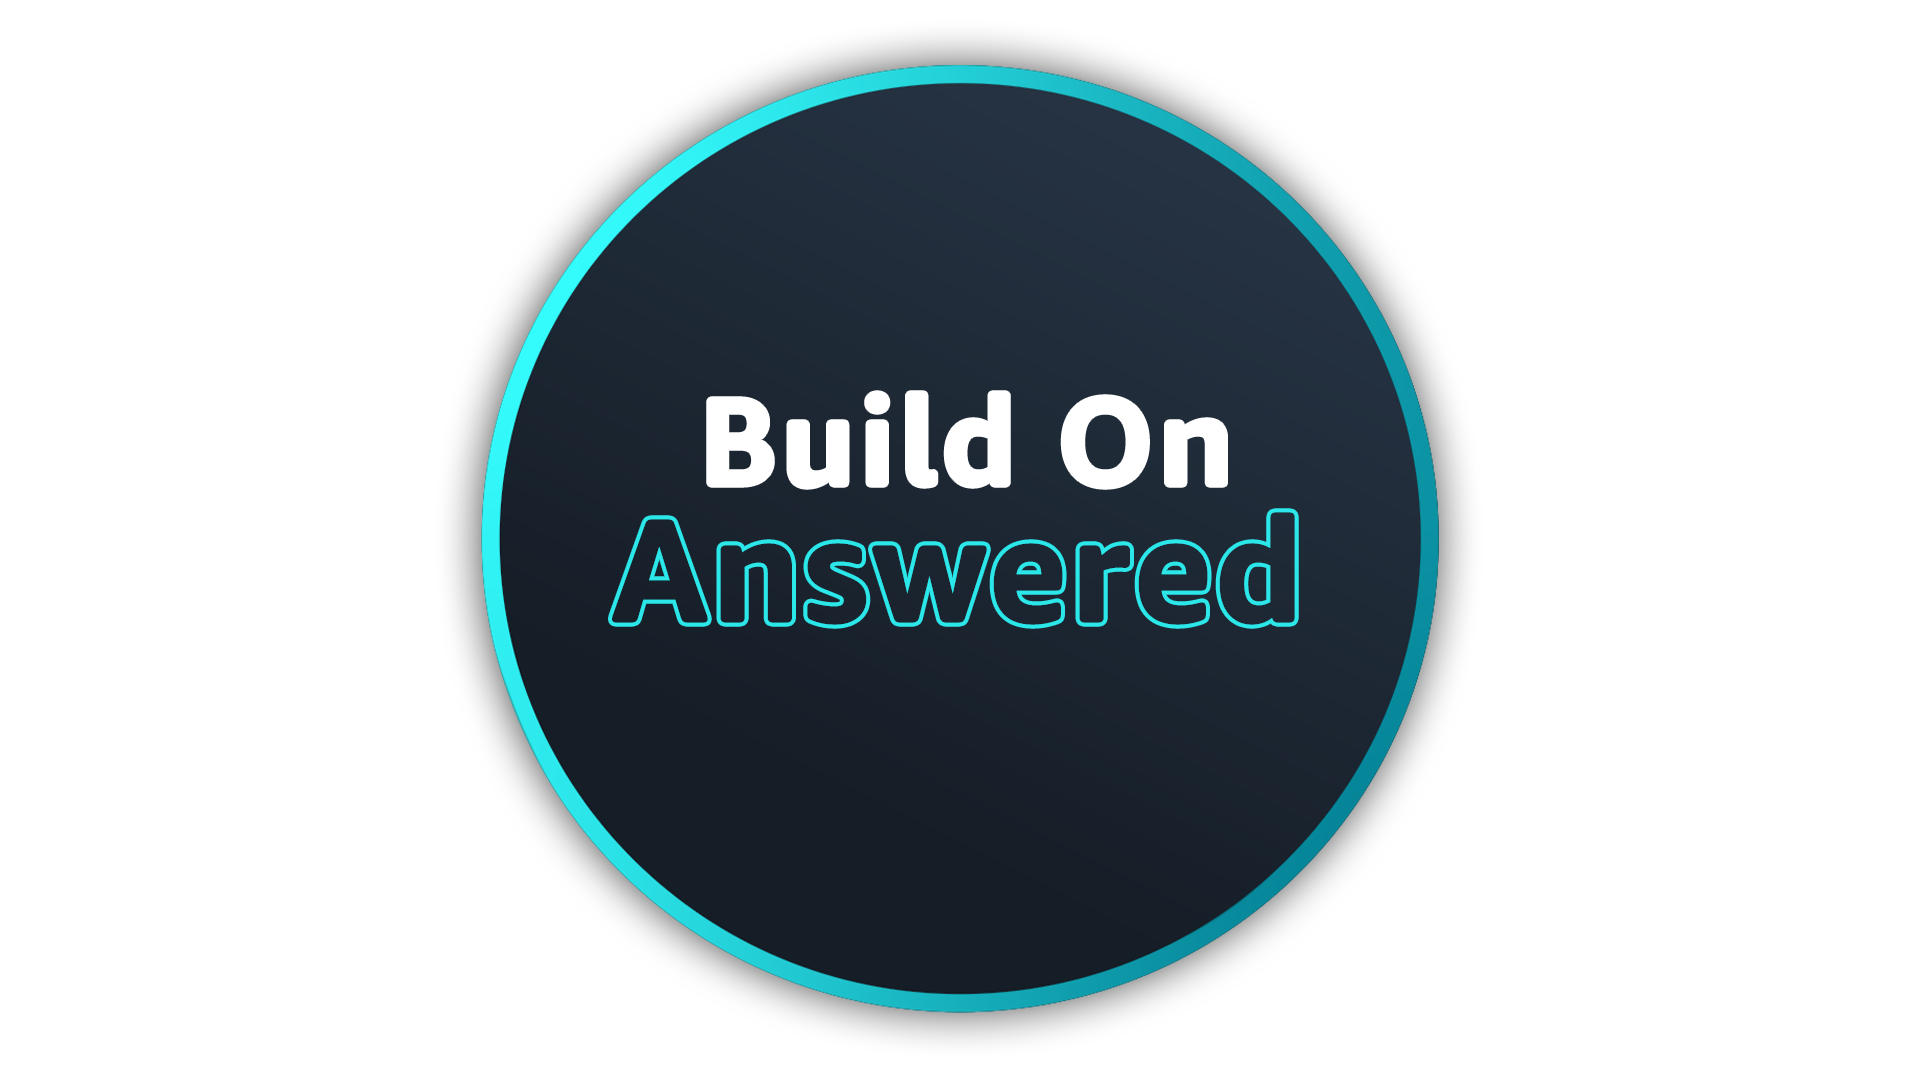 Build On Live: Answered